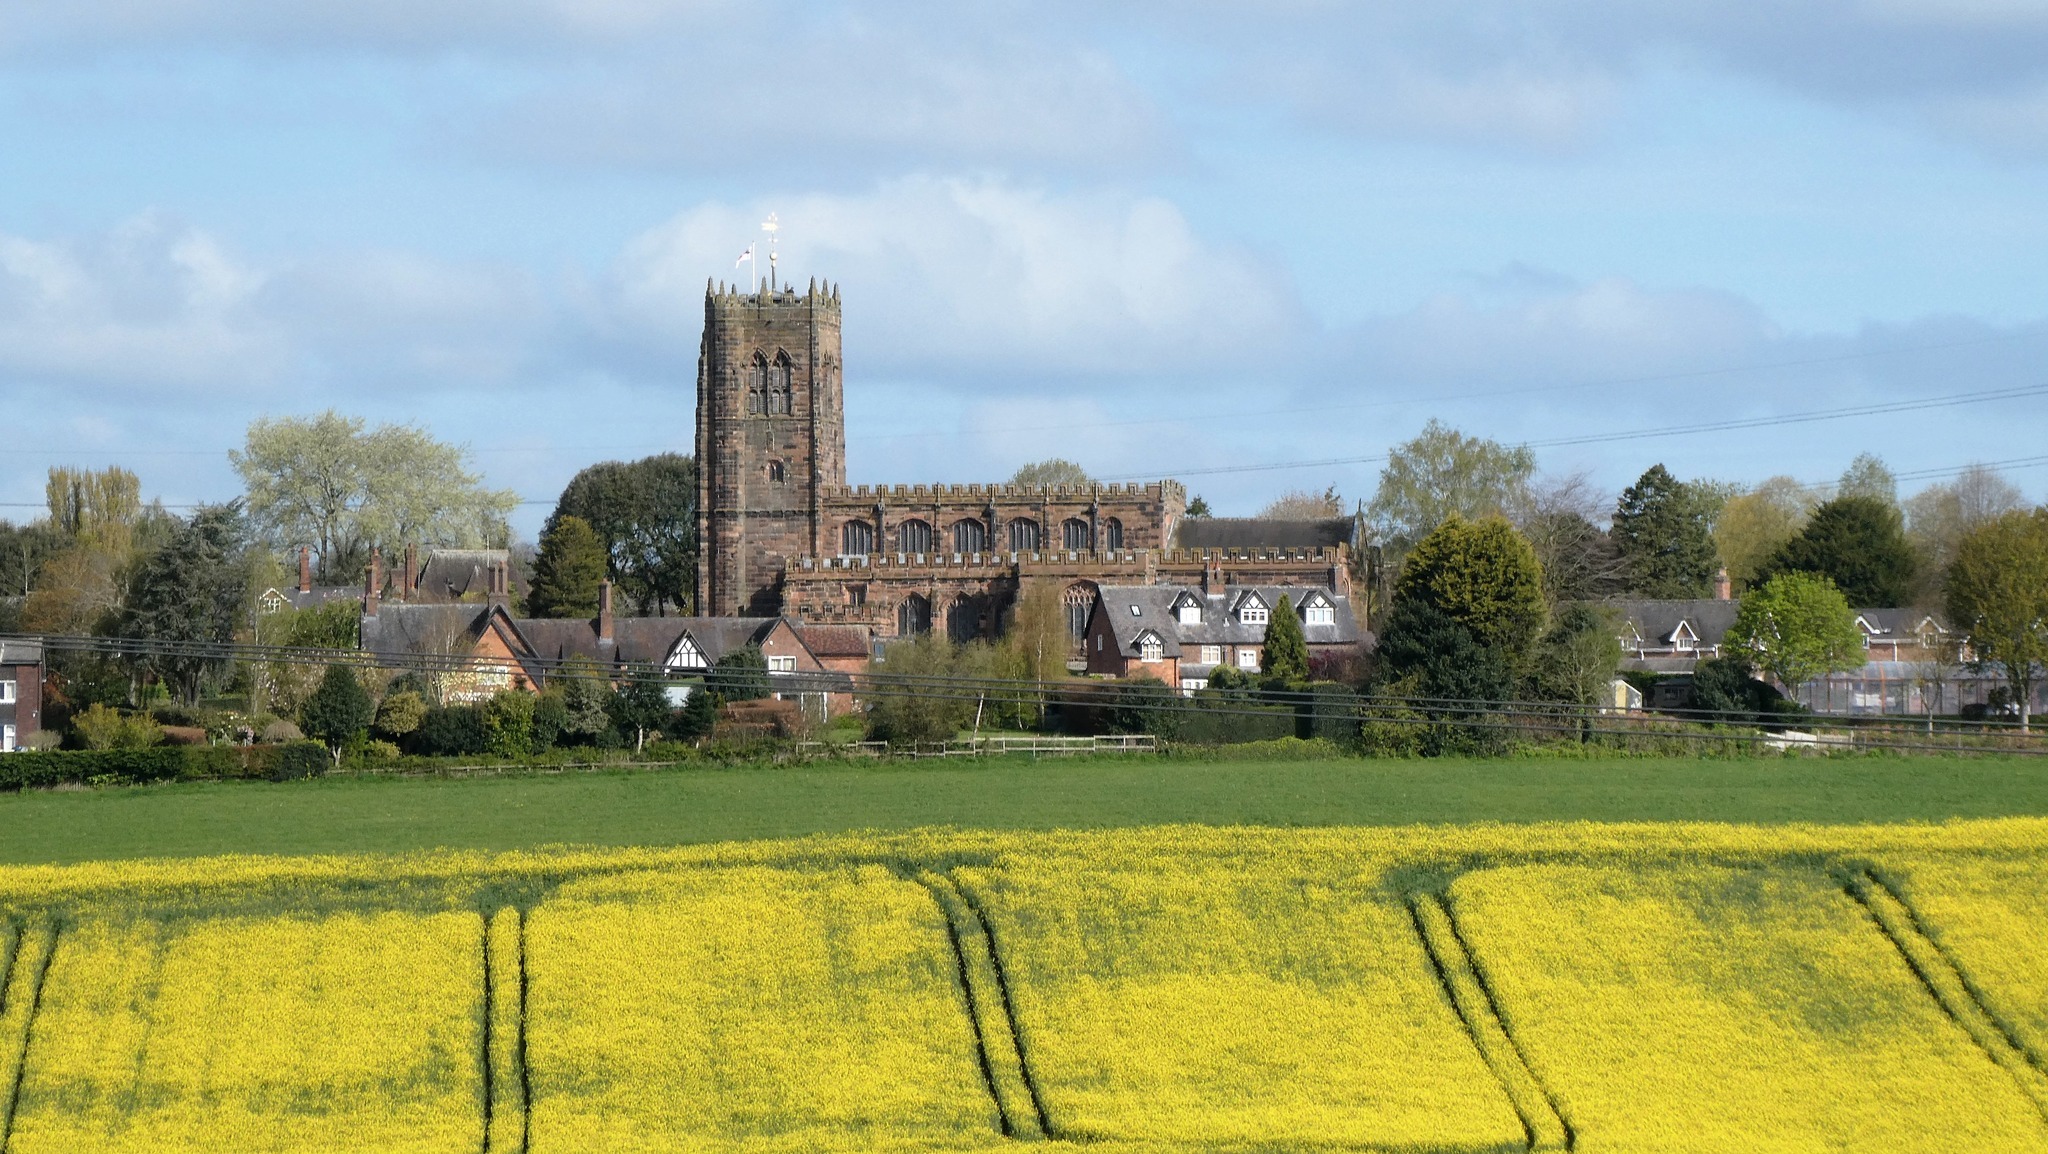 St Mary and All Saints Church in Great Budworth by Lynne Bentley